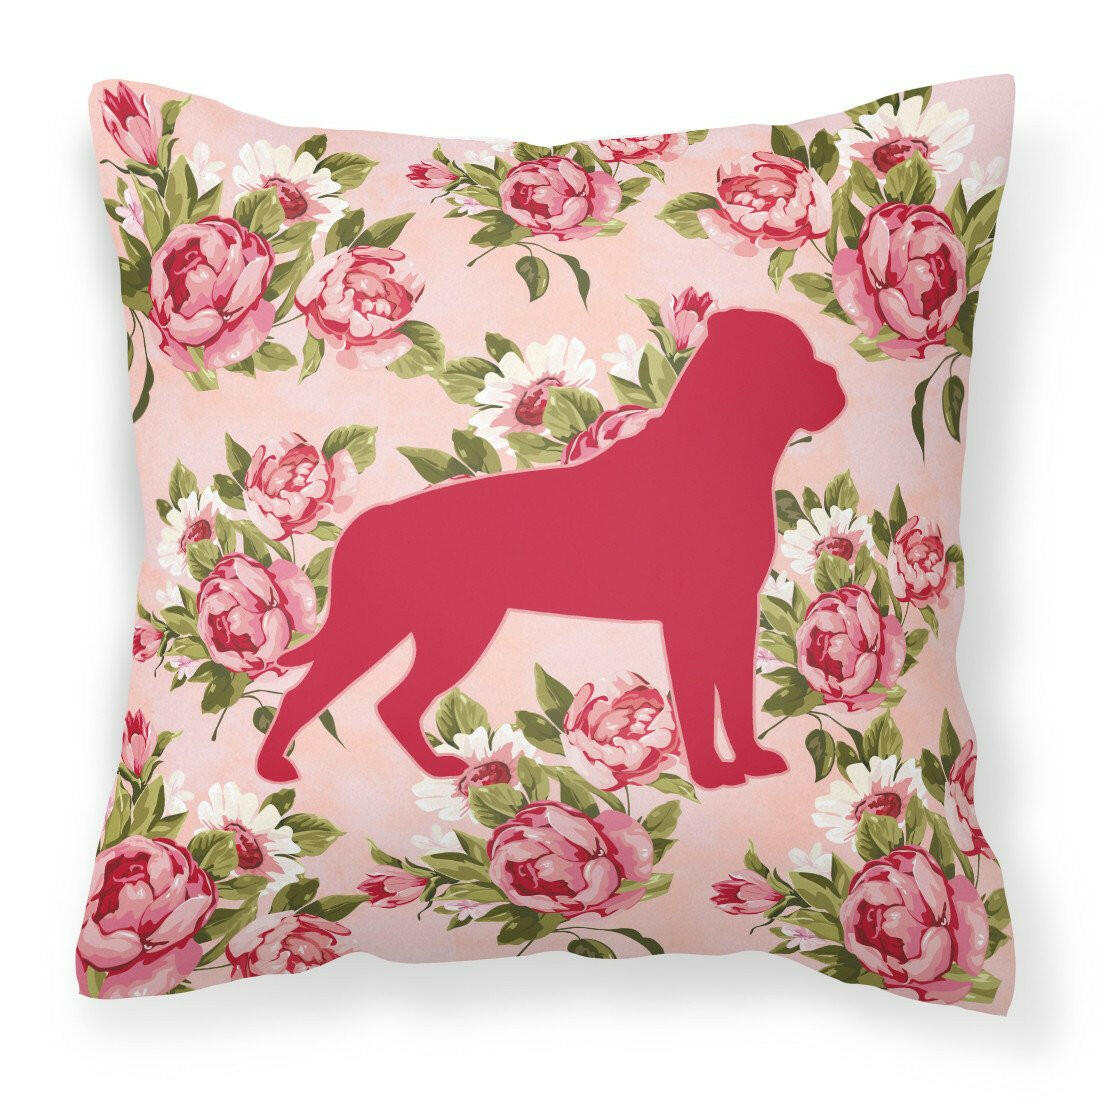 Rottweiler Shabby Chic Pink Roses  Fabric Decorative Pillow BB1083-RS-PK-PW1414 - the-store.com